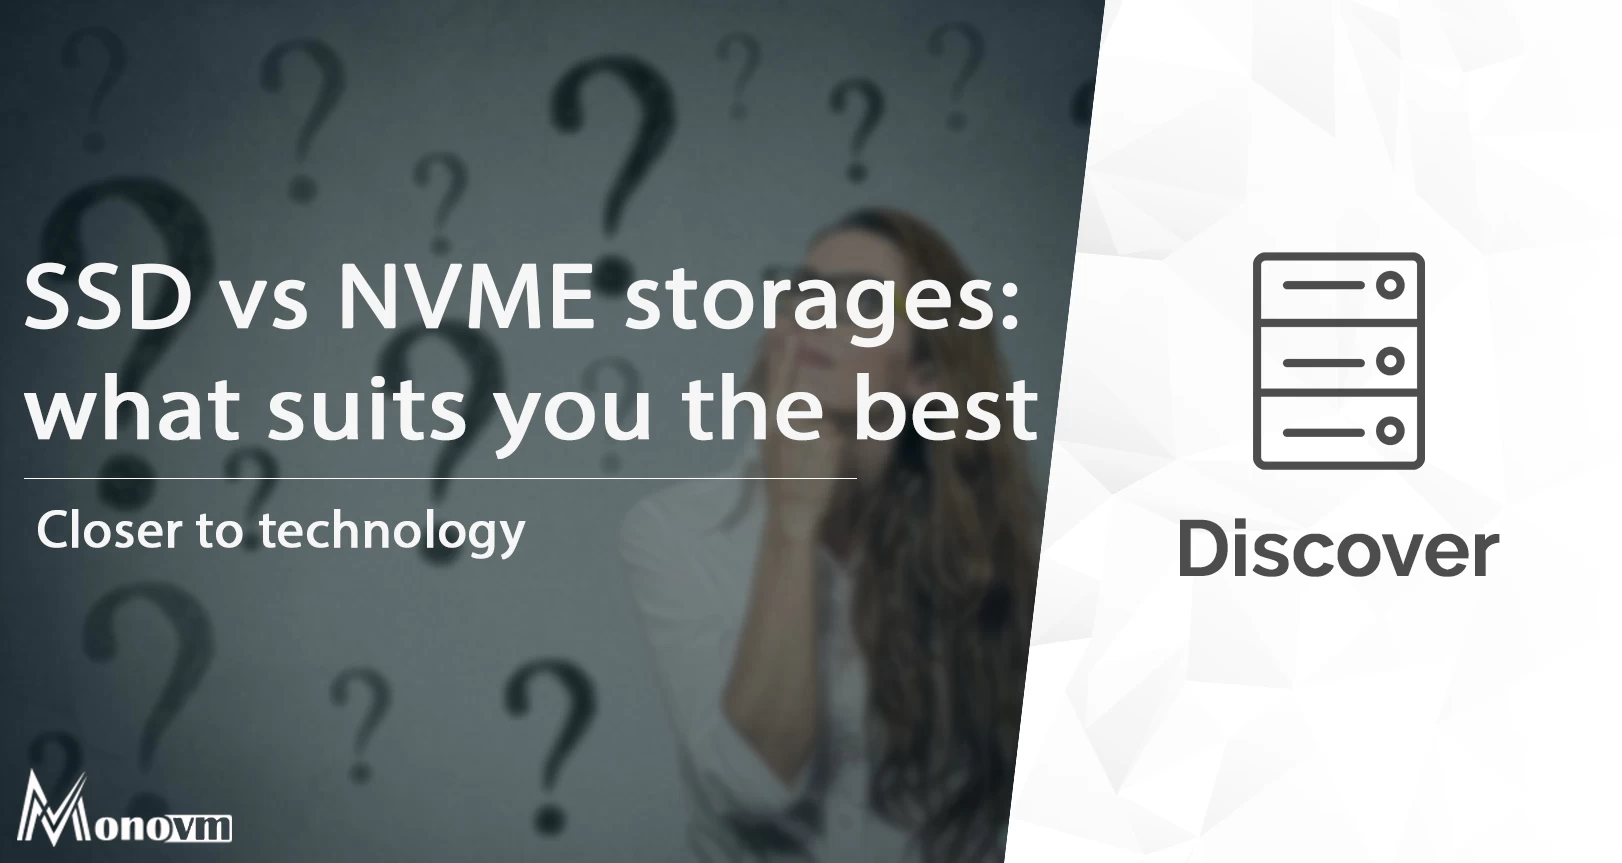 NVMe vs SSD: how do they differ from each other?